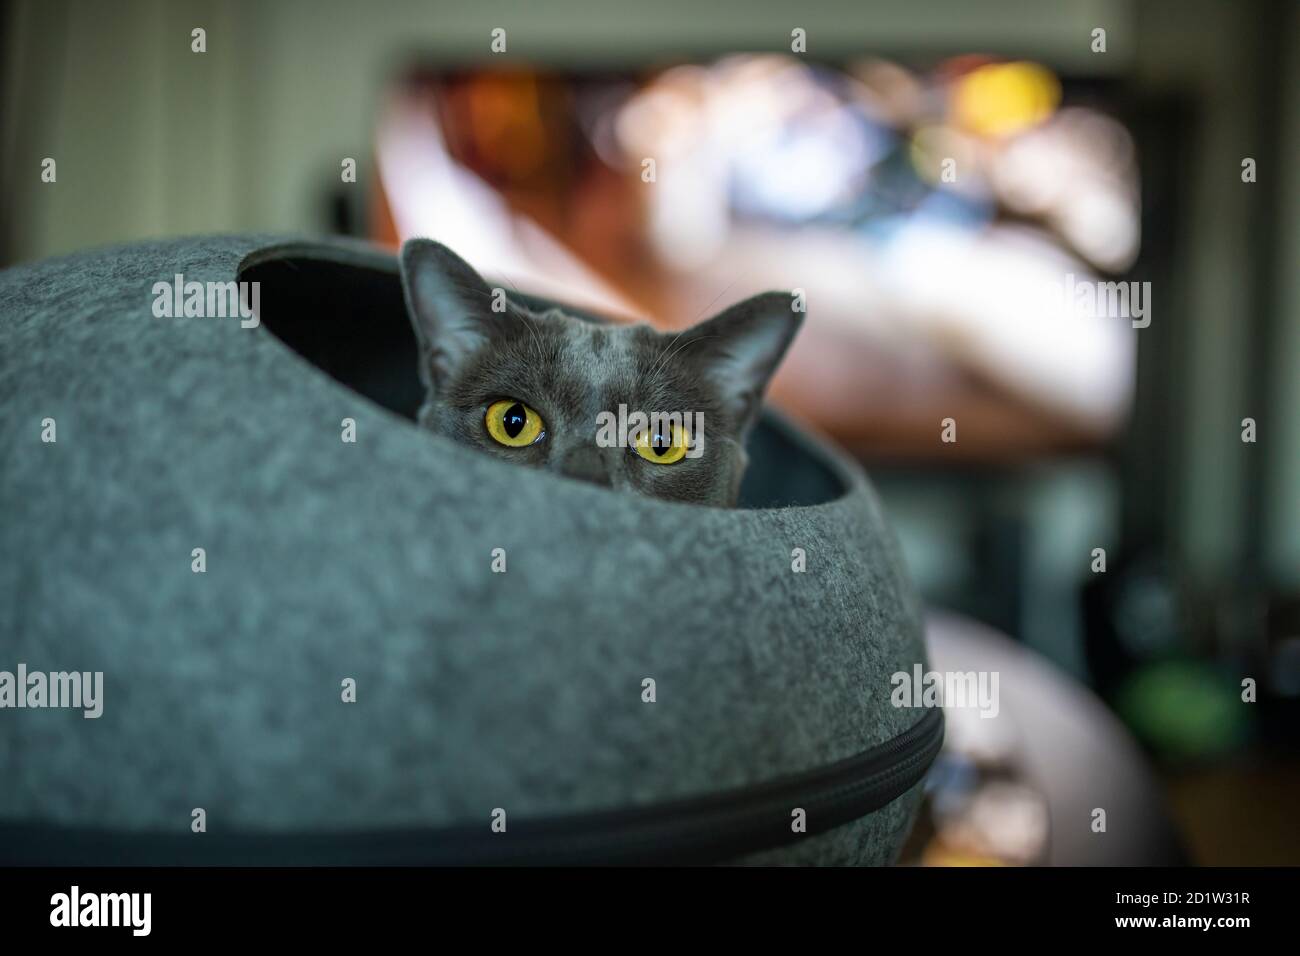 A gray blue purebred burmese playing hide and seek in a round cat bed furniture. The curious cat is in the living room with a tv defoused in the backg Stock Photo